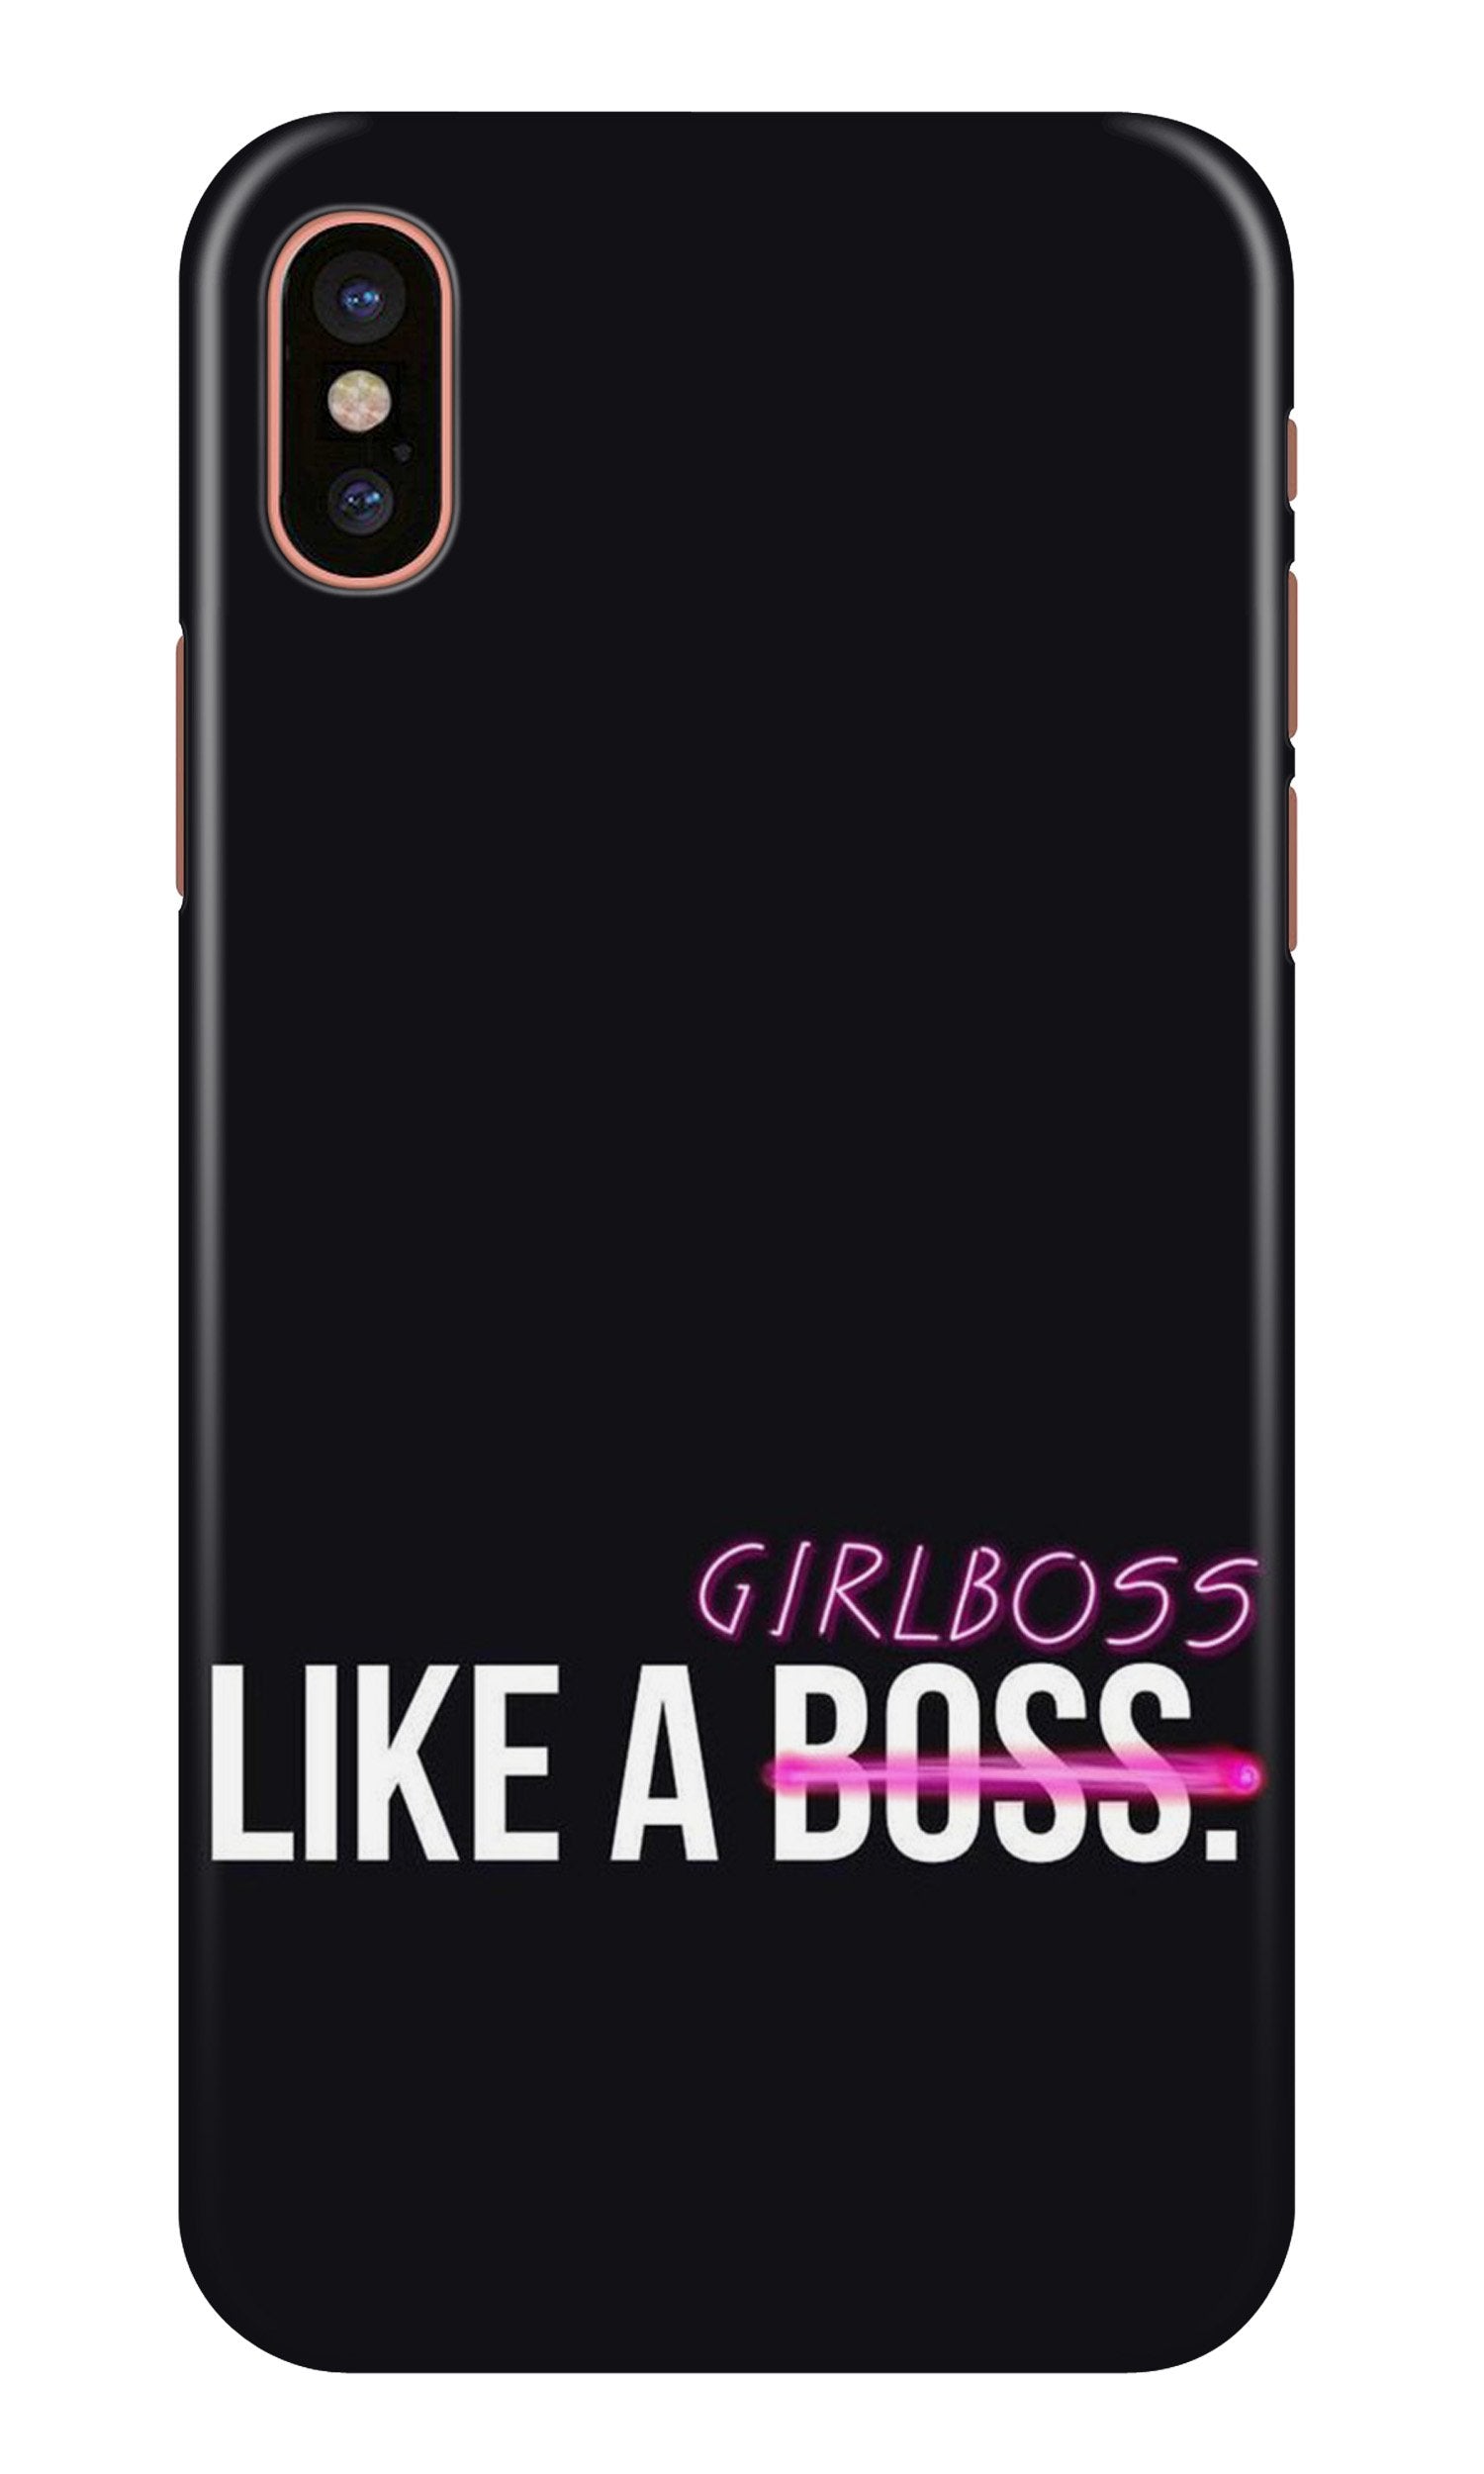 Like a Girl Boss Case for iPhone Xs (Design No. 265)